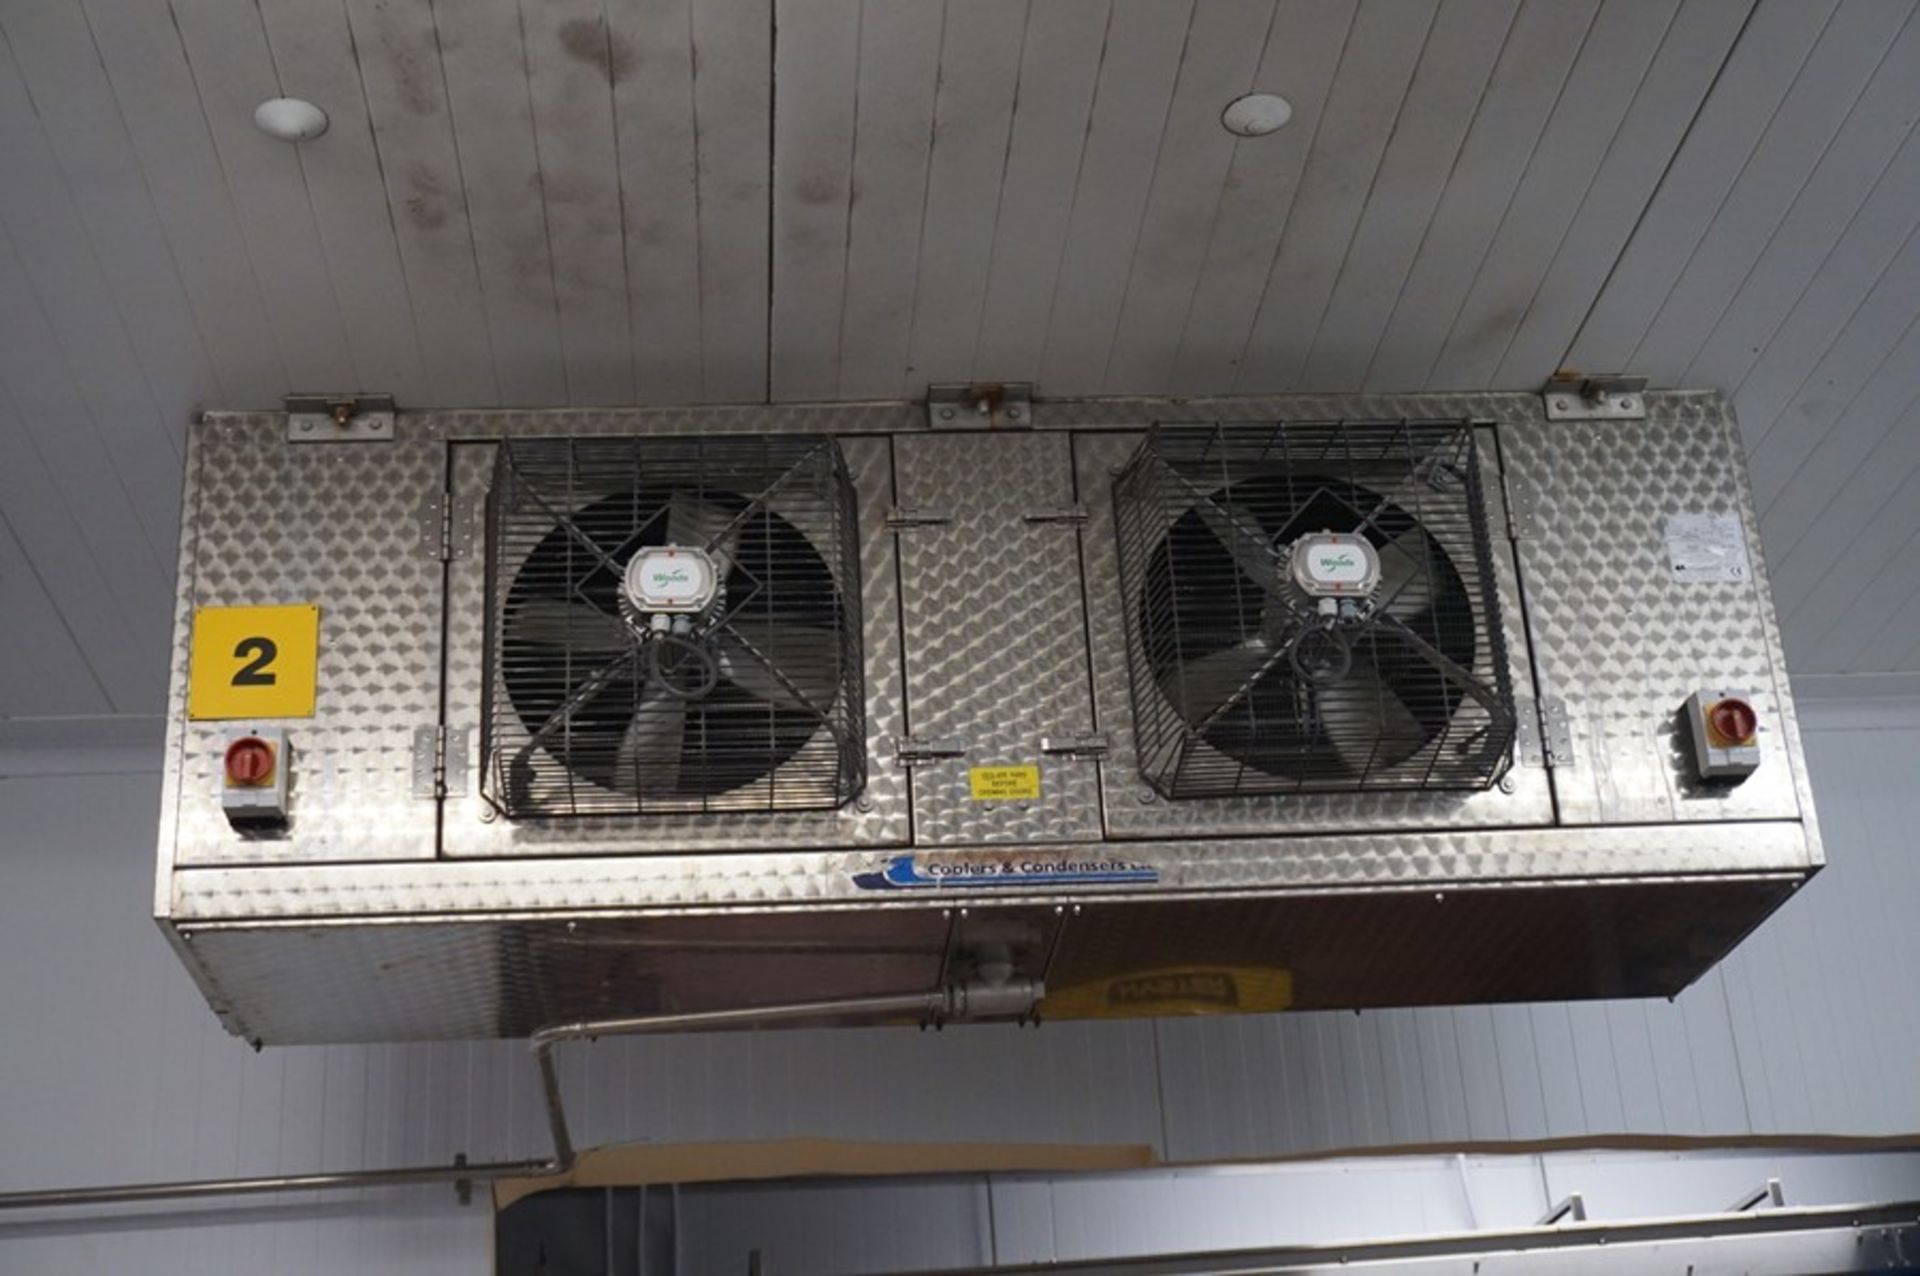 Coolers & Condensers, Model: CA12 84 CLN, stainless steel twin fan chiller unit, Serial No. SOP19361 - Image 2 of 2